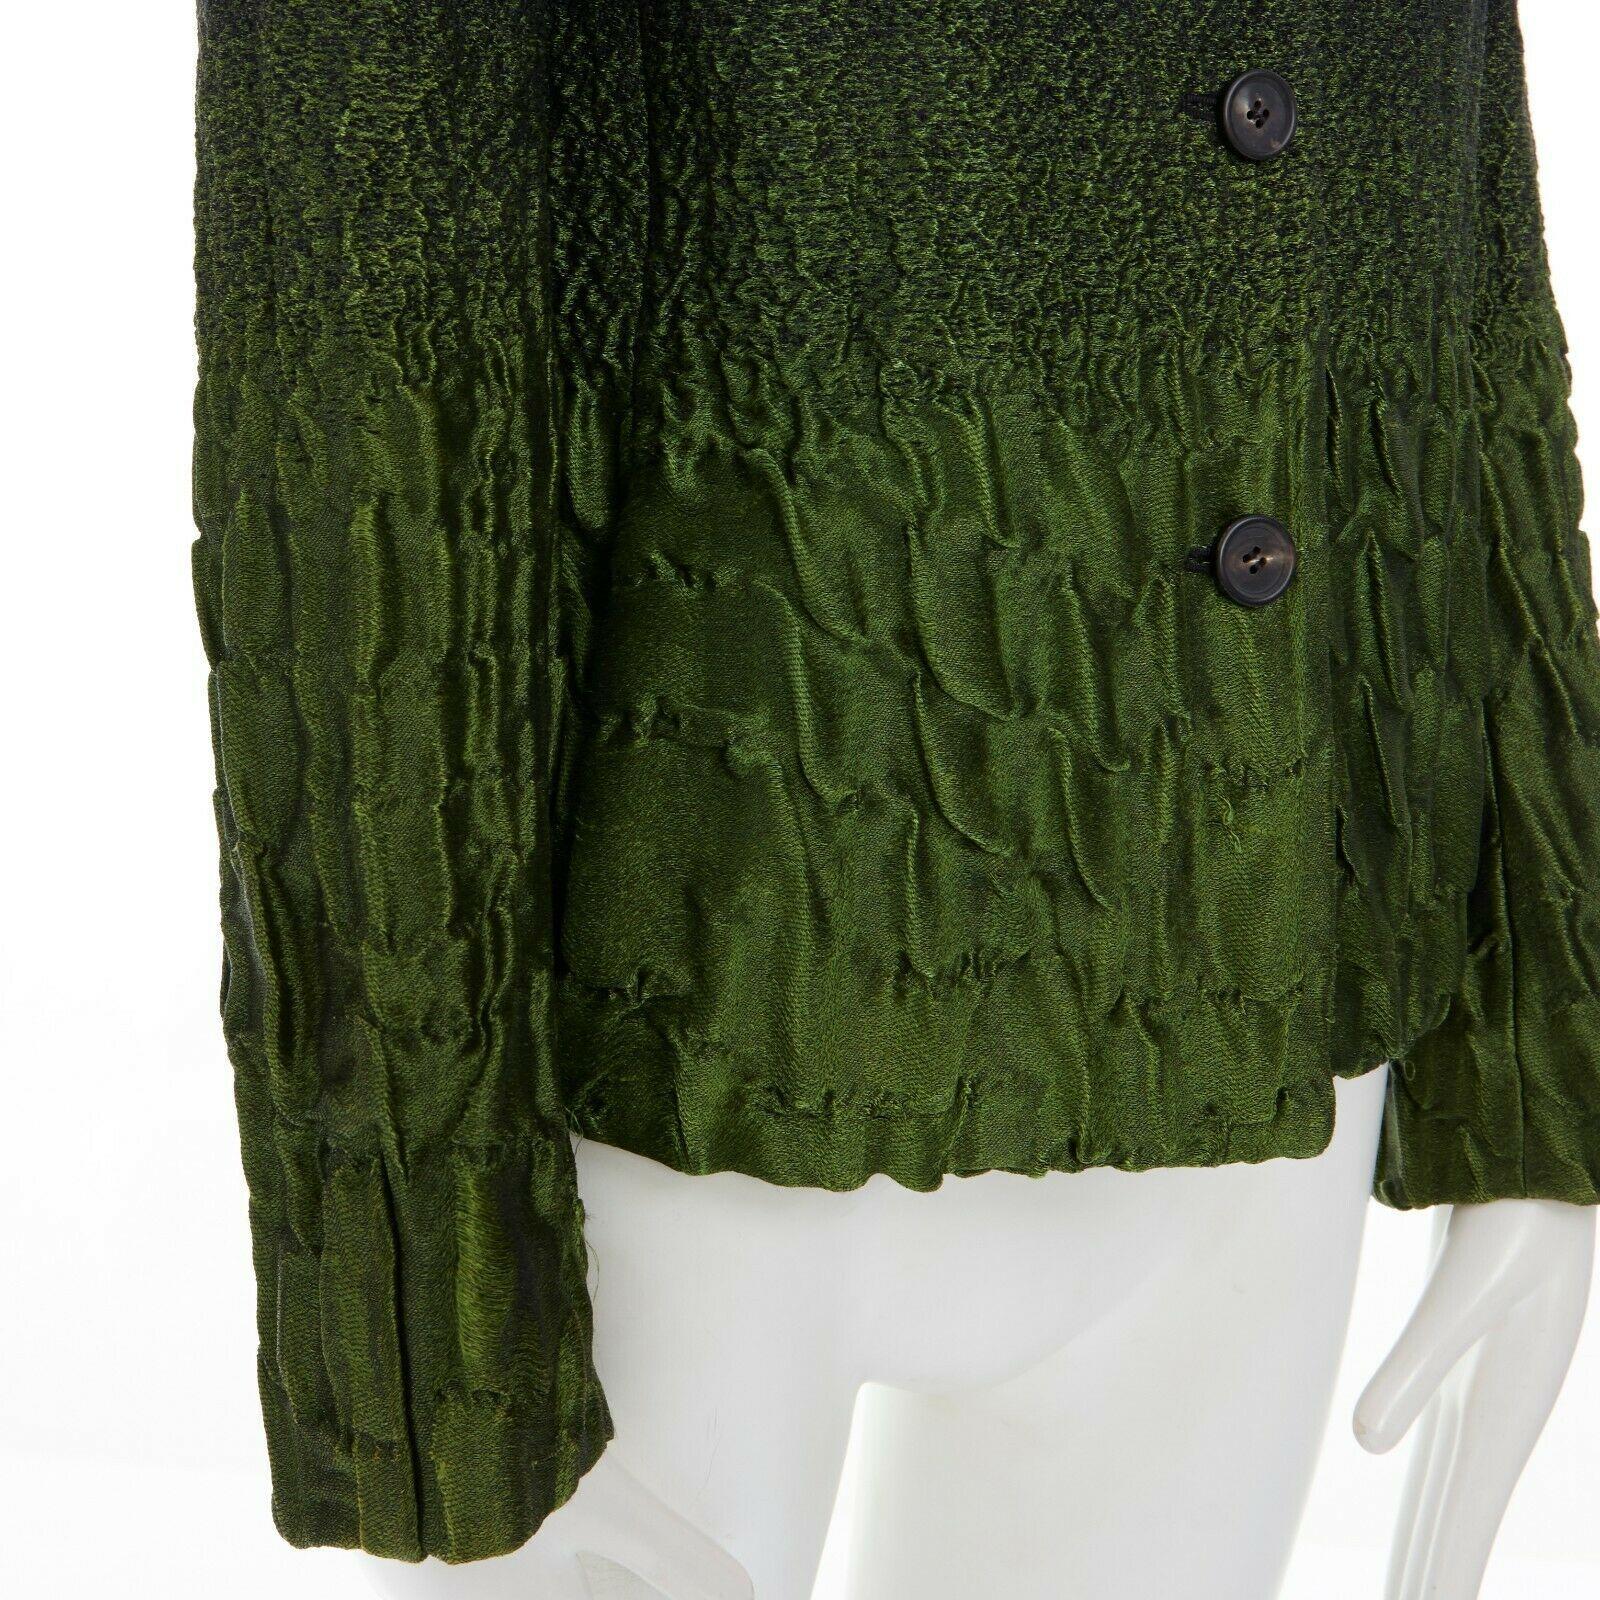 runway PRADA black green gradient shrinken crinkled short jacket IT40 S

PRADA
Feels like wool. Spread notched collar. Button front closure. 
Crinkled gradient fabrication. Long sleeves. Fully lined. 
Made in Italy.

CONDITION
Very good, this item